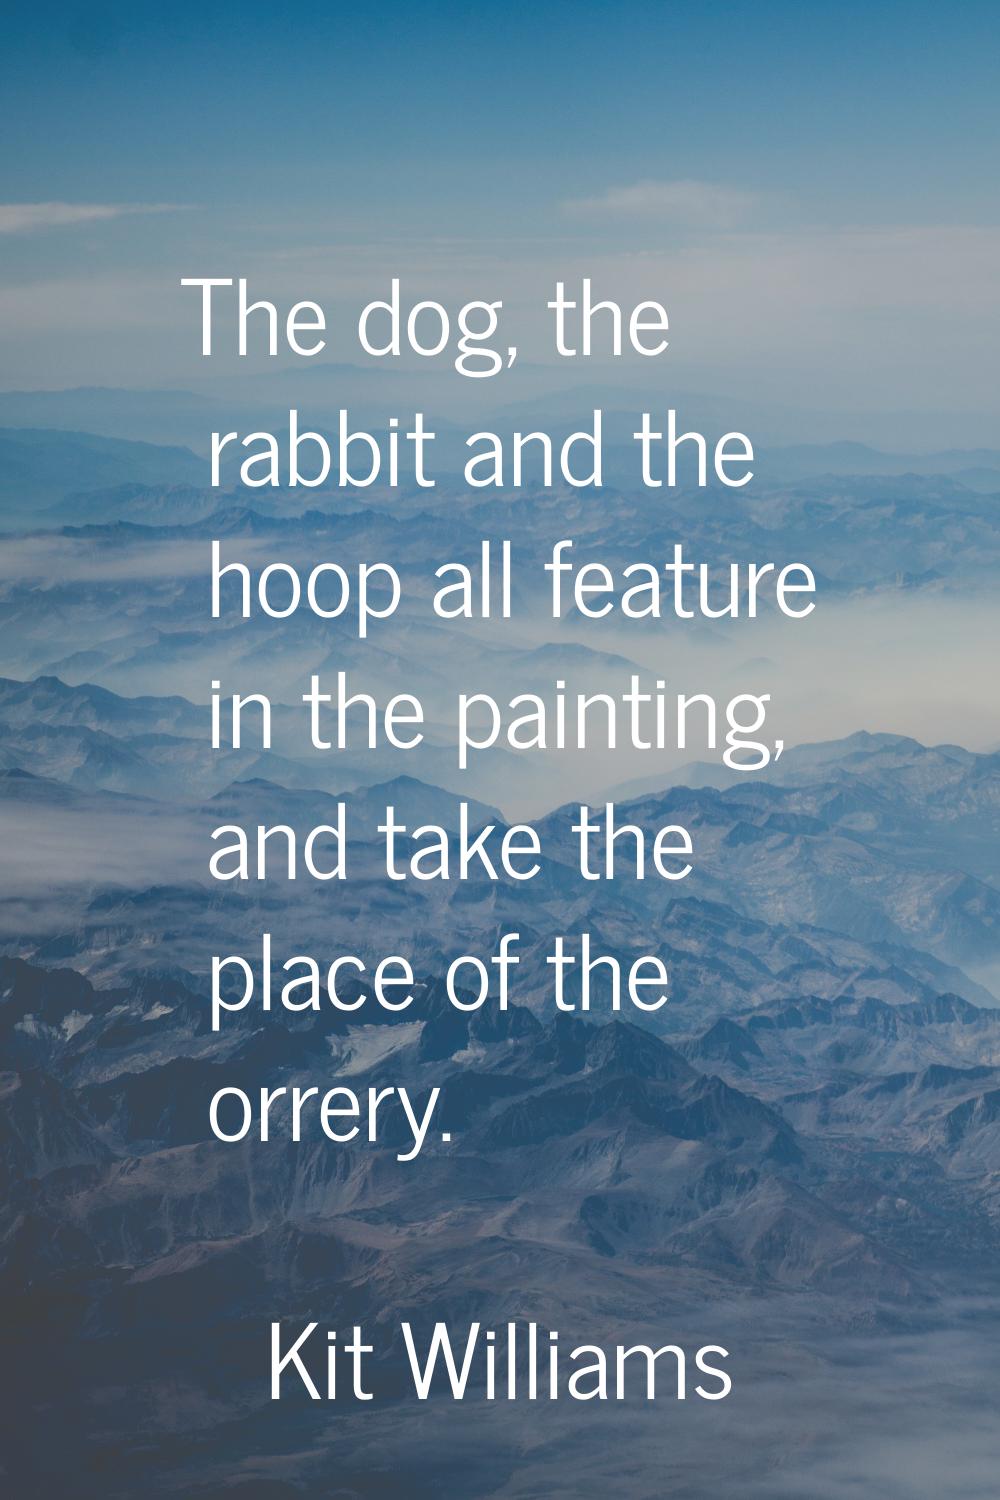 The dog, the rabbit and the hoop all feature in the painting, and take the place of the orrery.